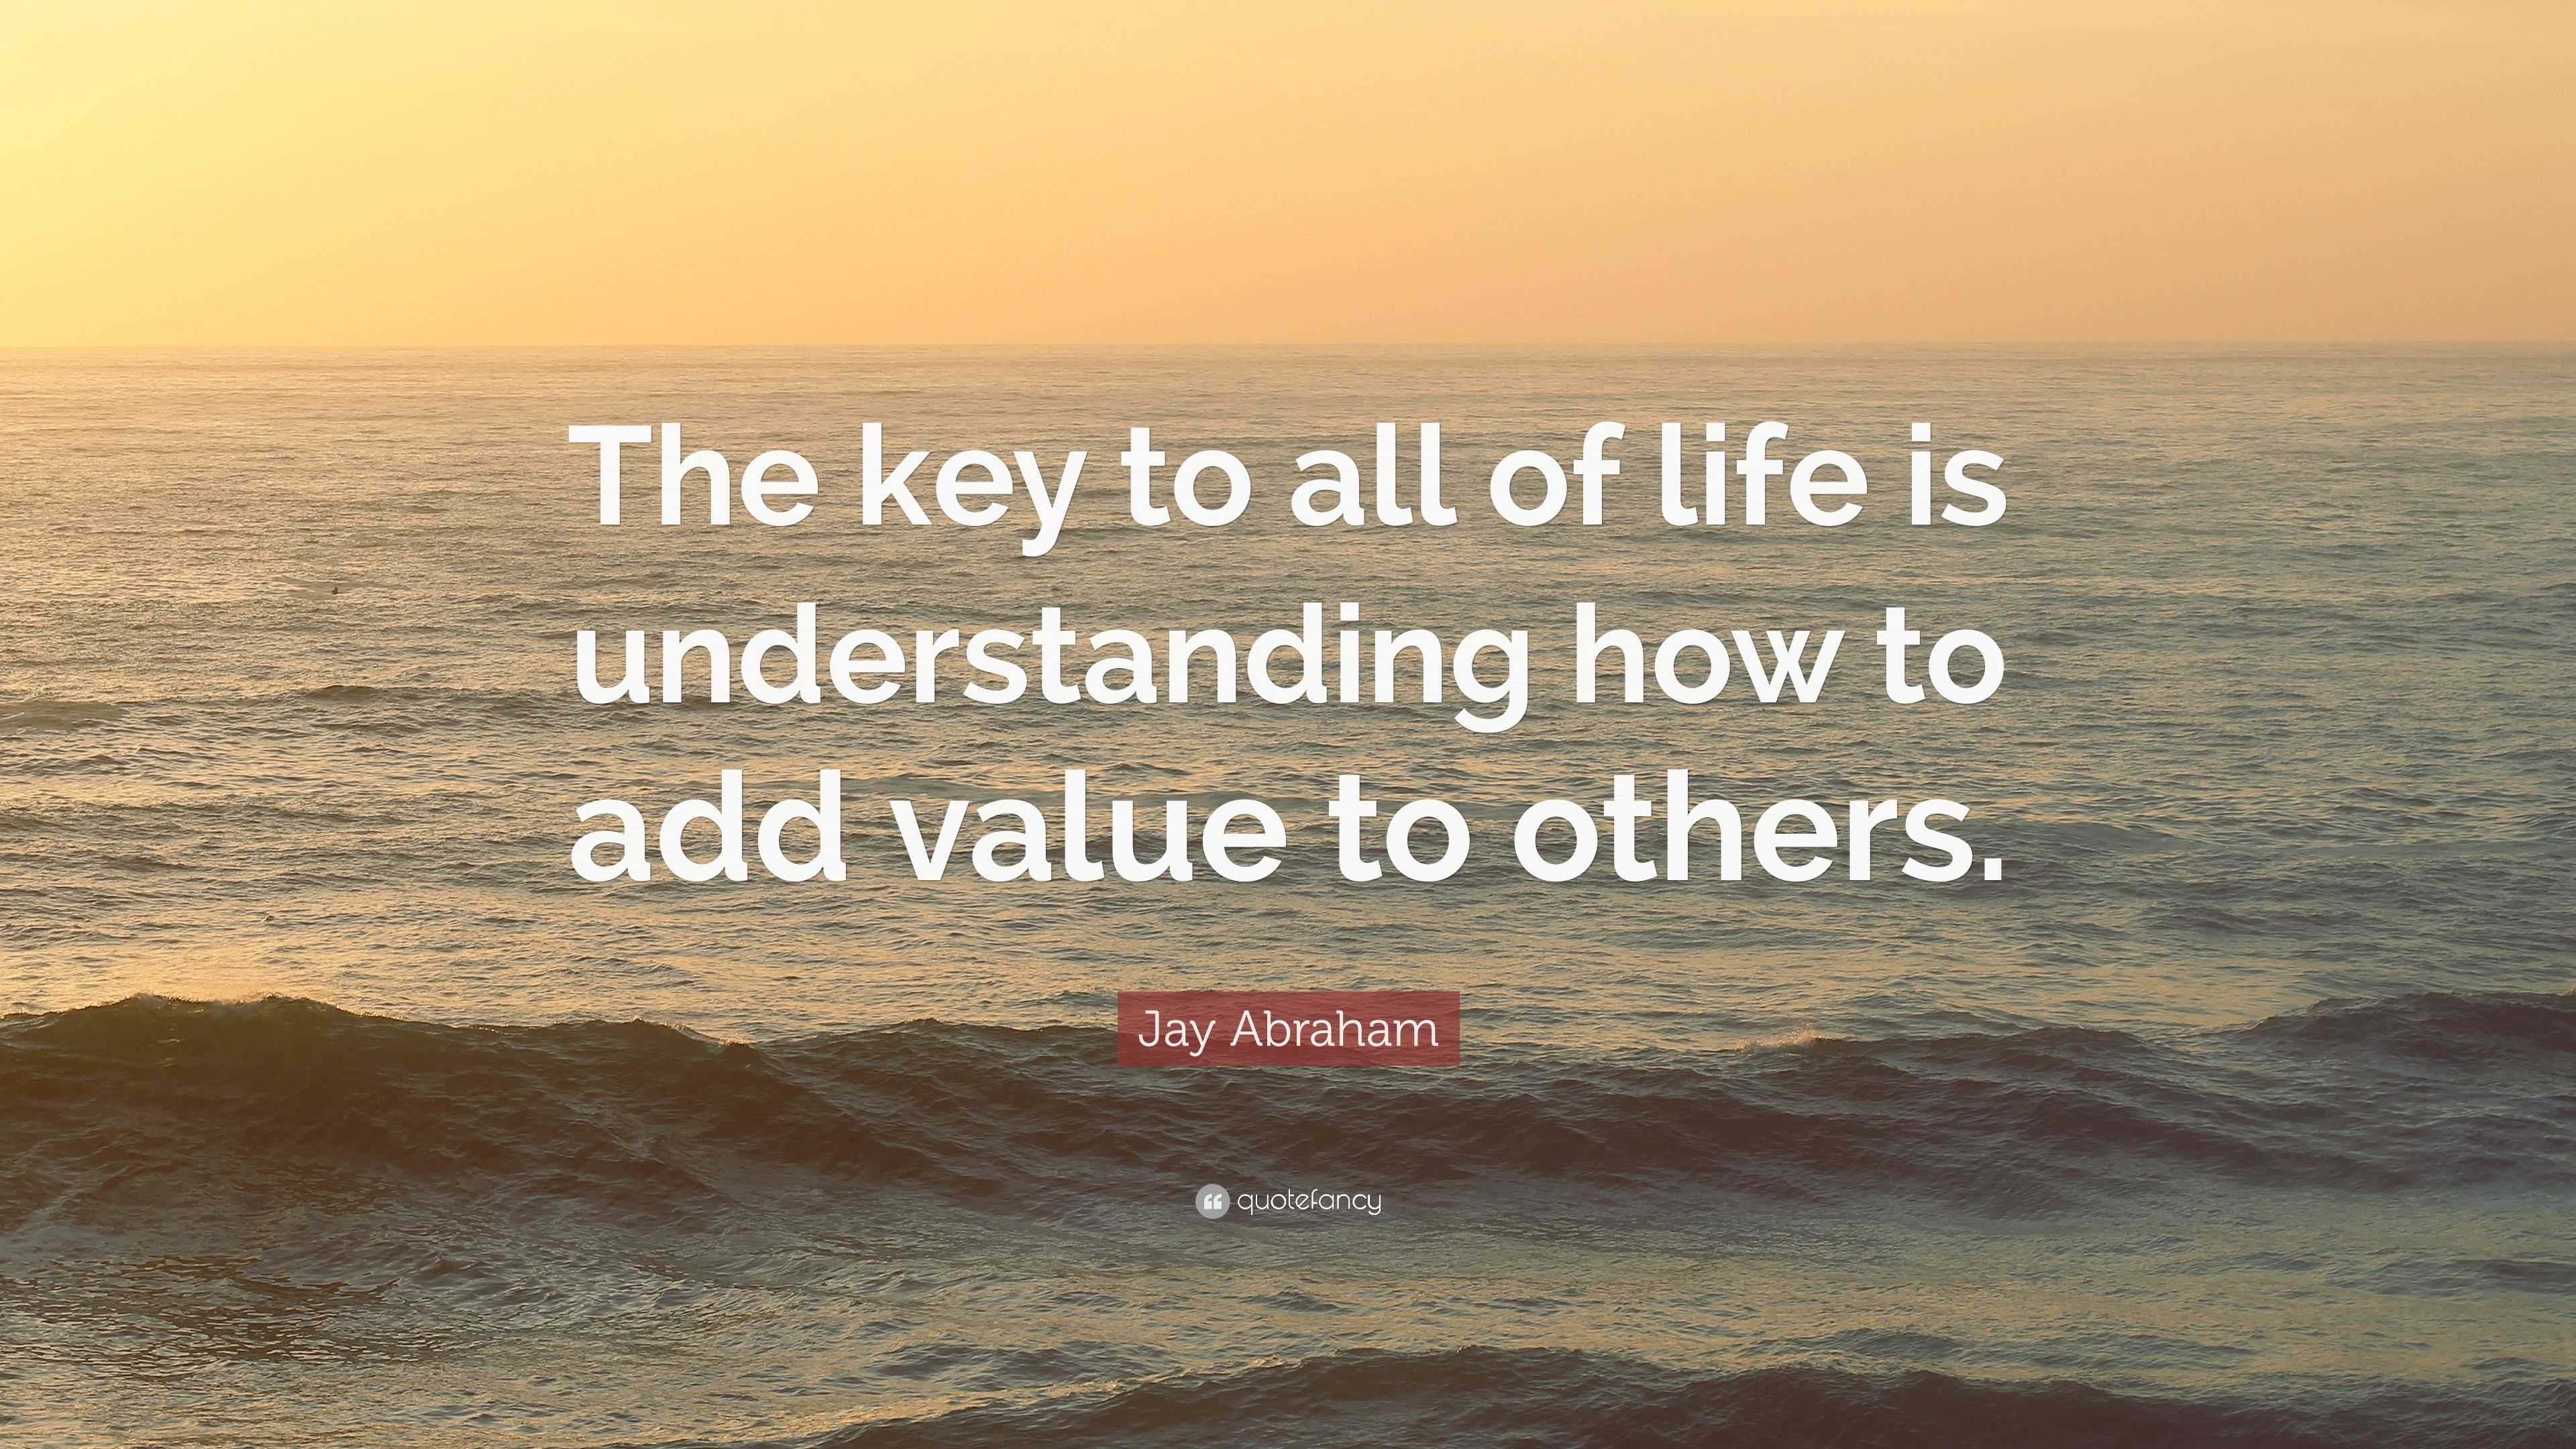 Jay Abraham Quote: “The Key To All Of Life Is Understanding How To Add